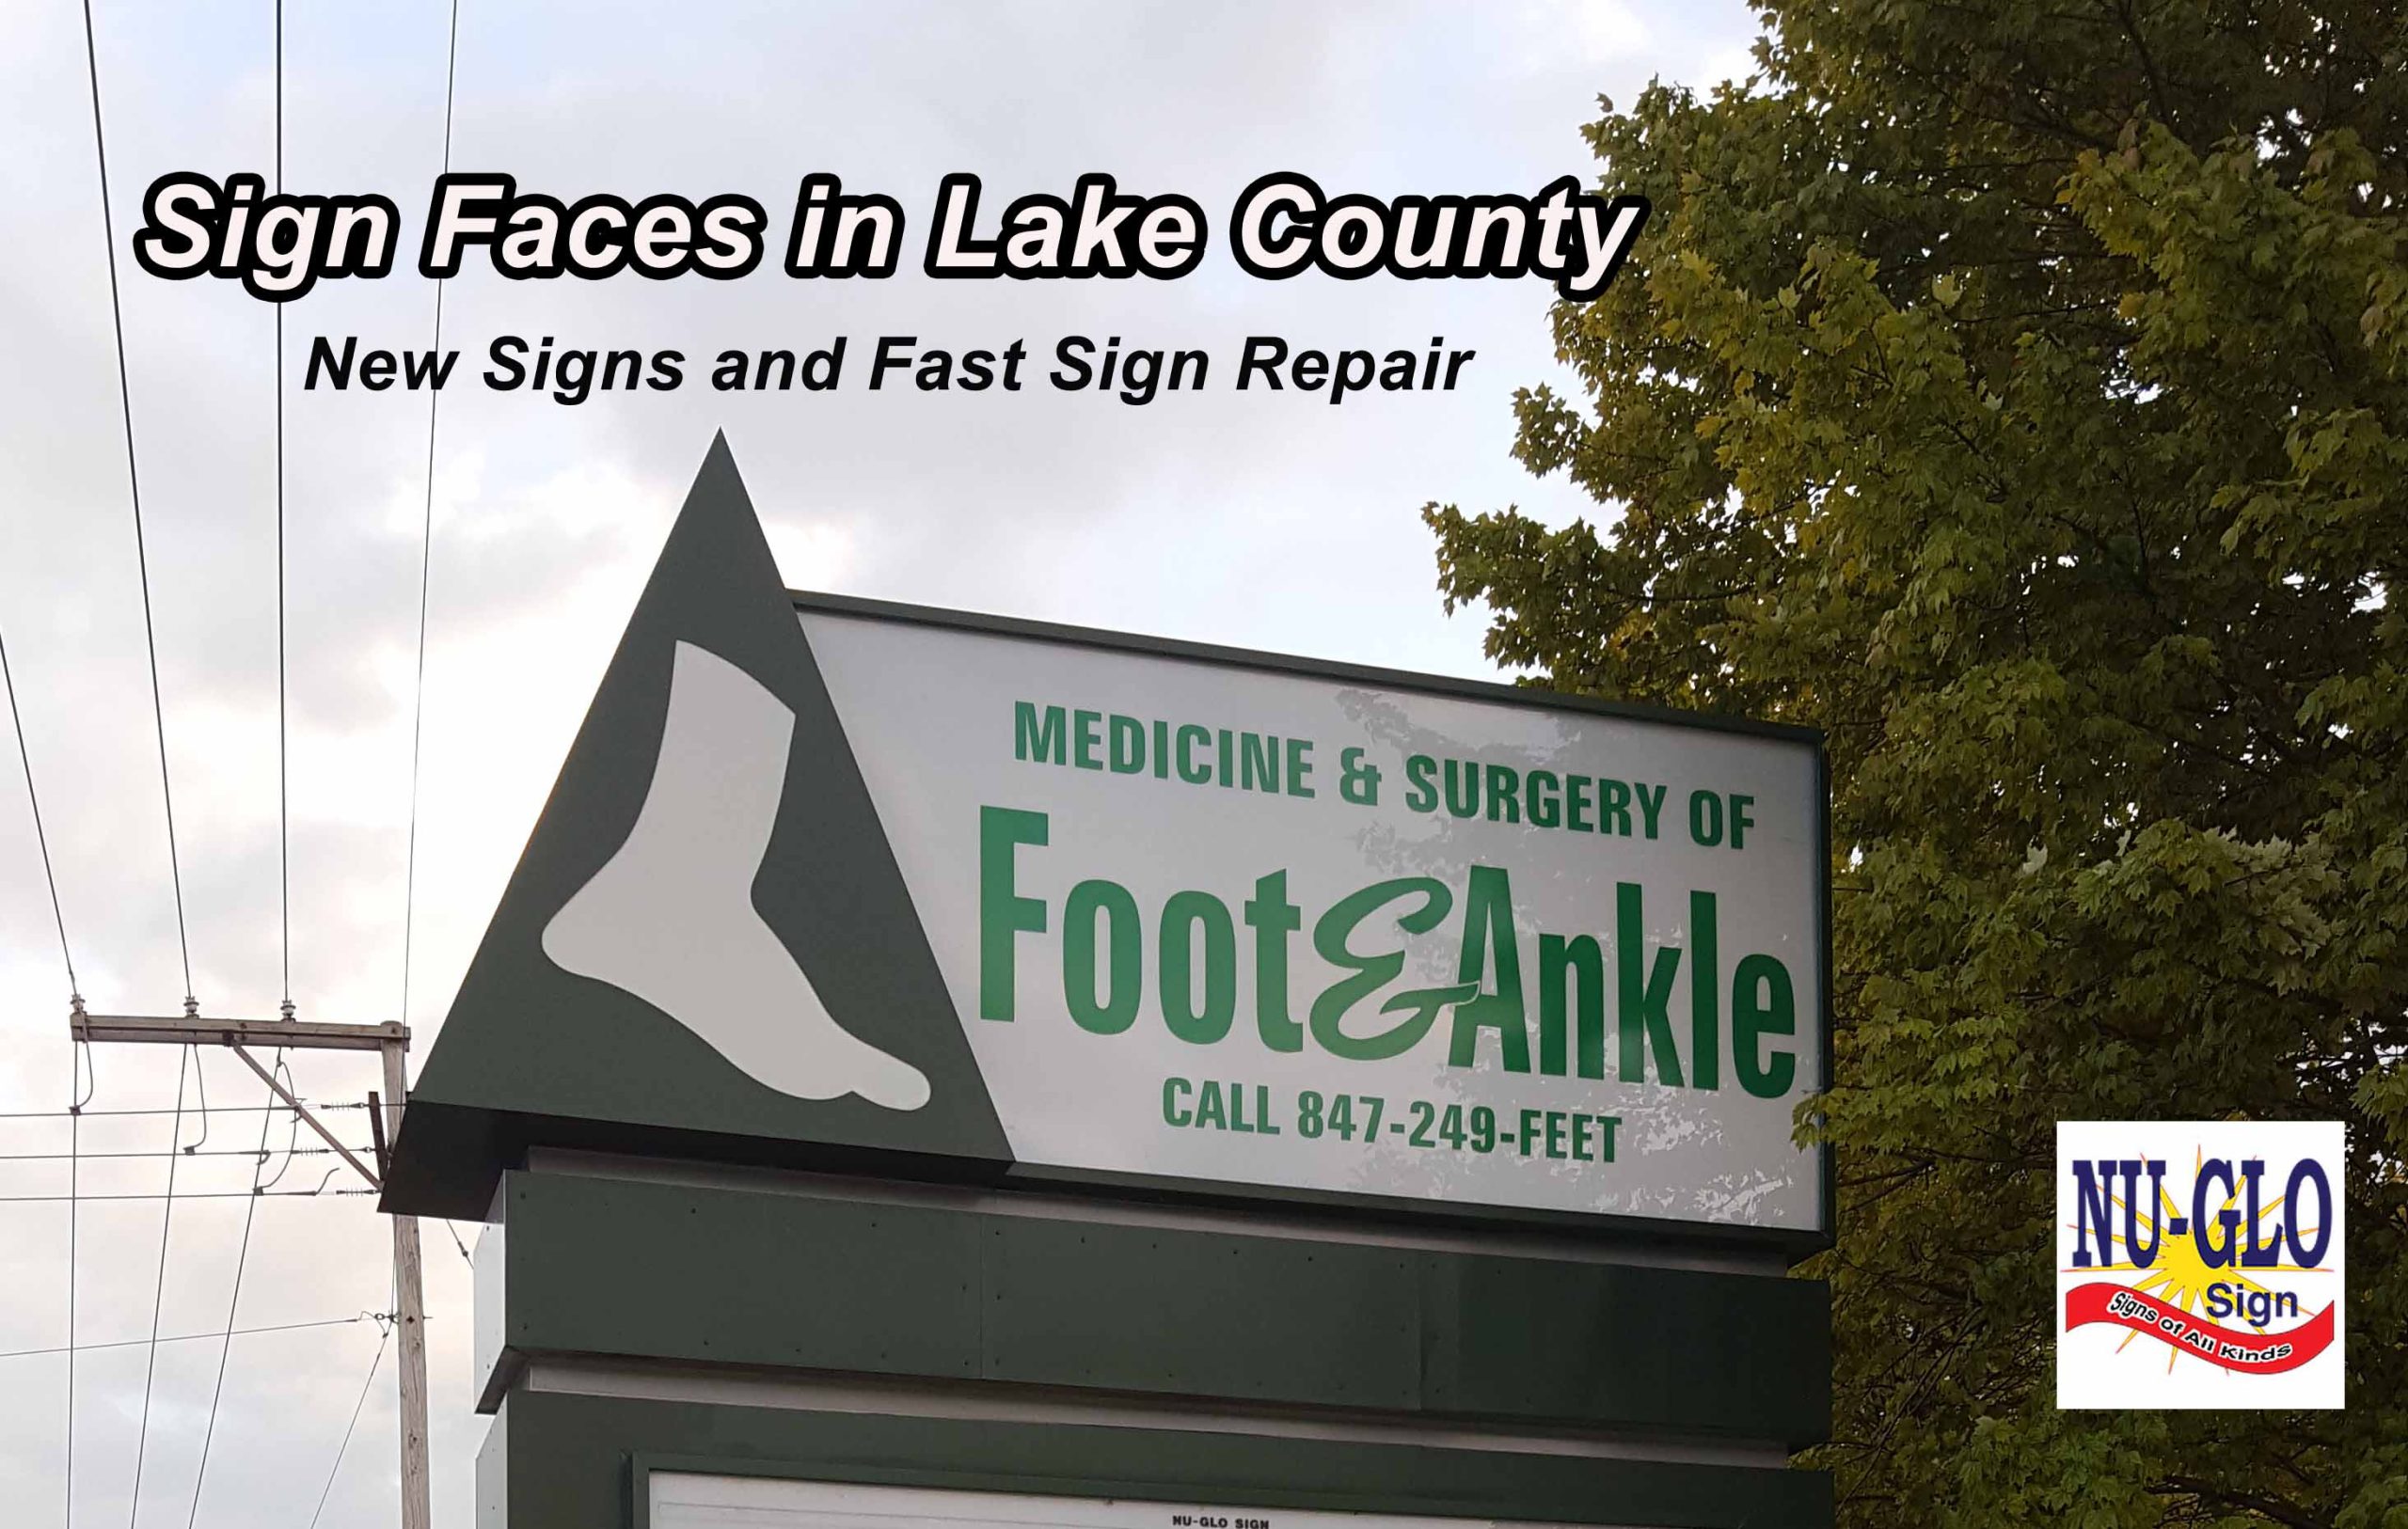 Replacement sign faces in Lake County